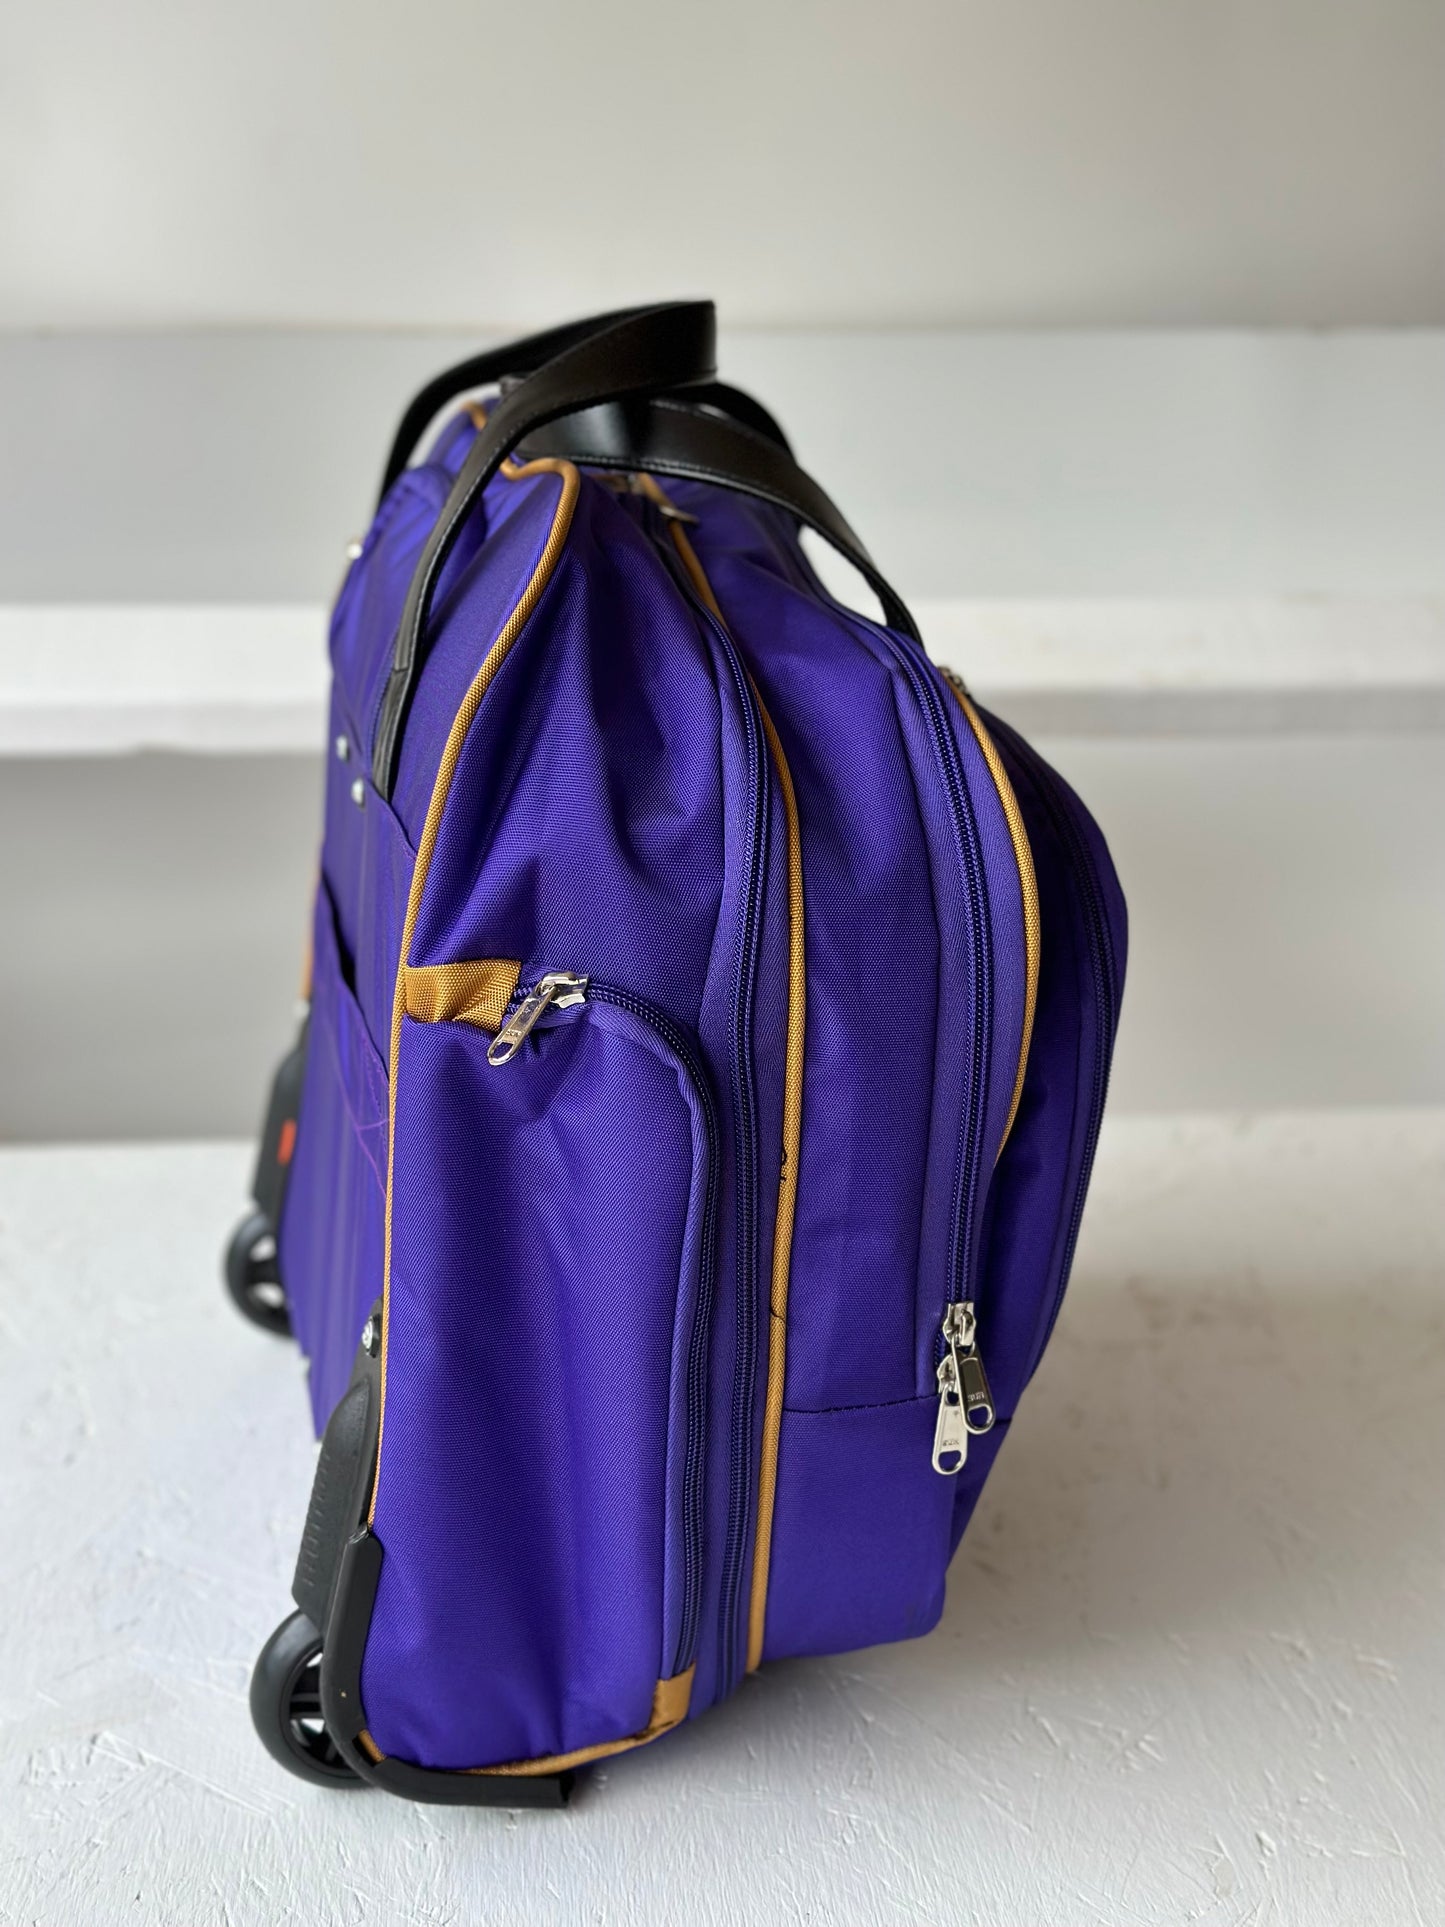 Omega Psi Phi Fraternity Royal Purple & Old Gold color Laptop with Trolley- Luggage/cabin Bag for travelling.- authorized vendor